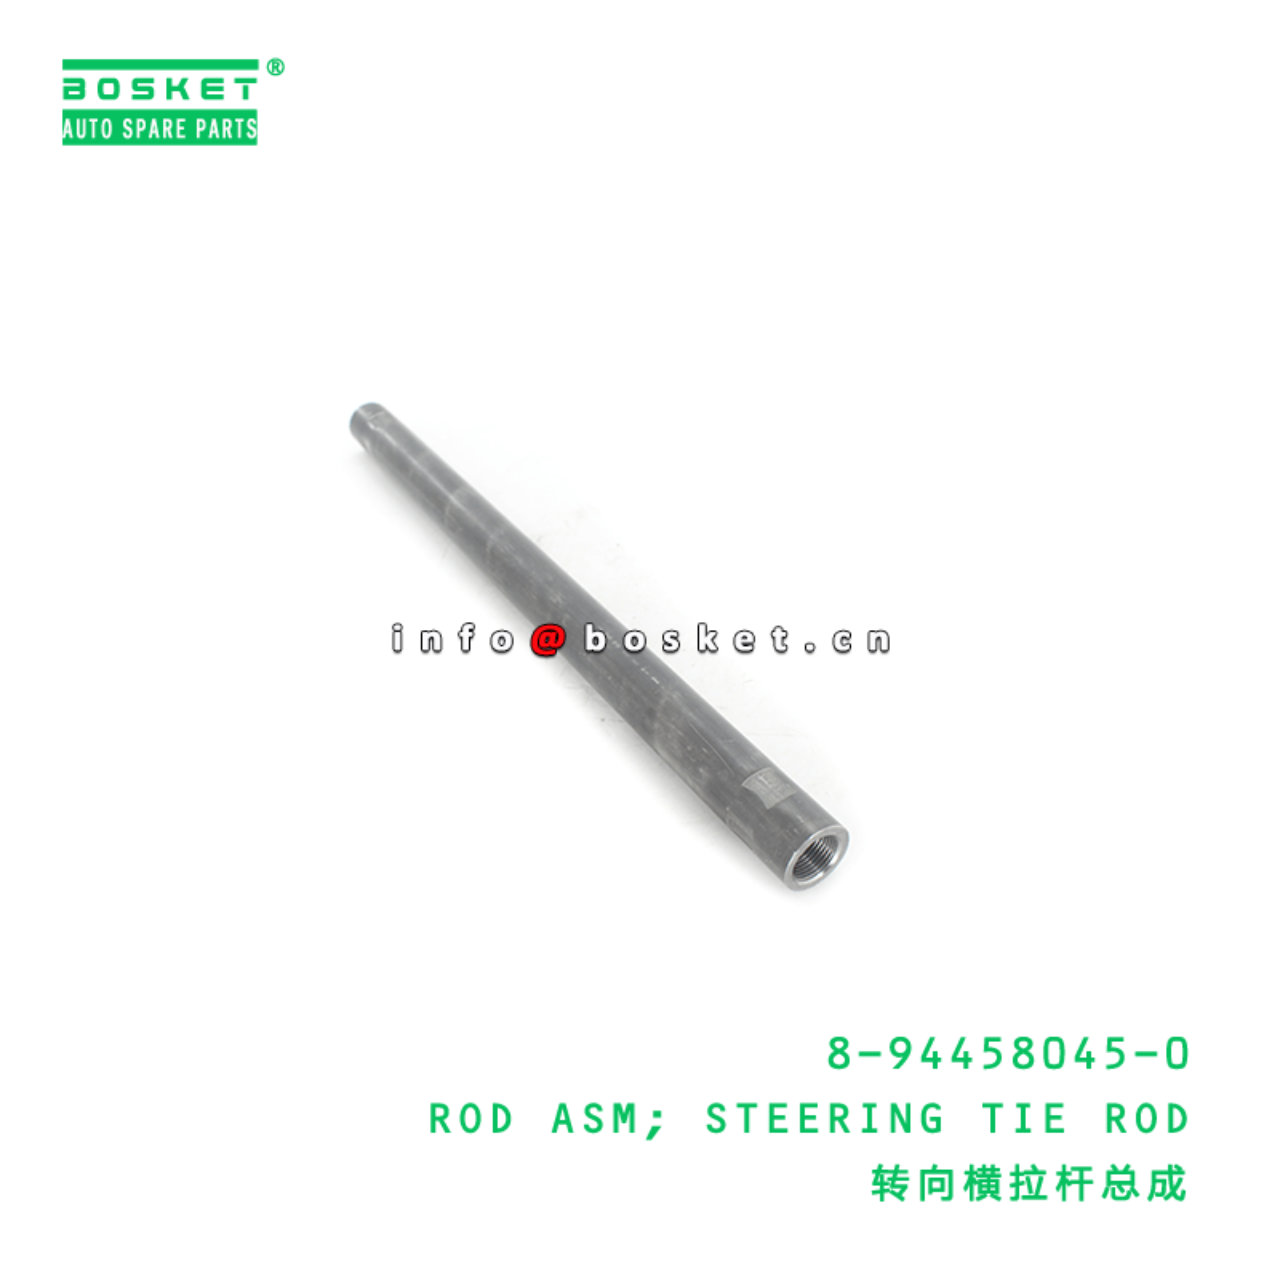 8-94458045-0 Steering Tie Rod Rod Assembly 8944580450 Suitable for ISUZU NPR